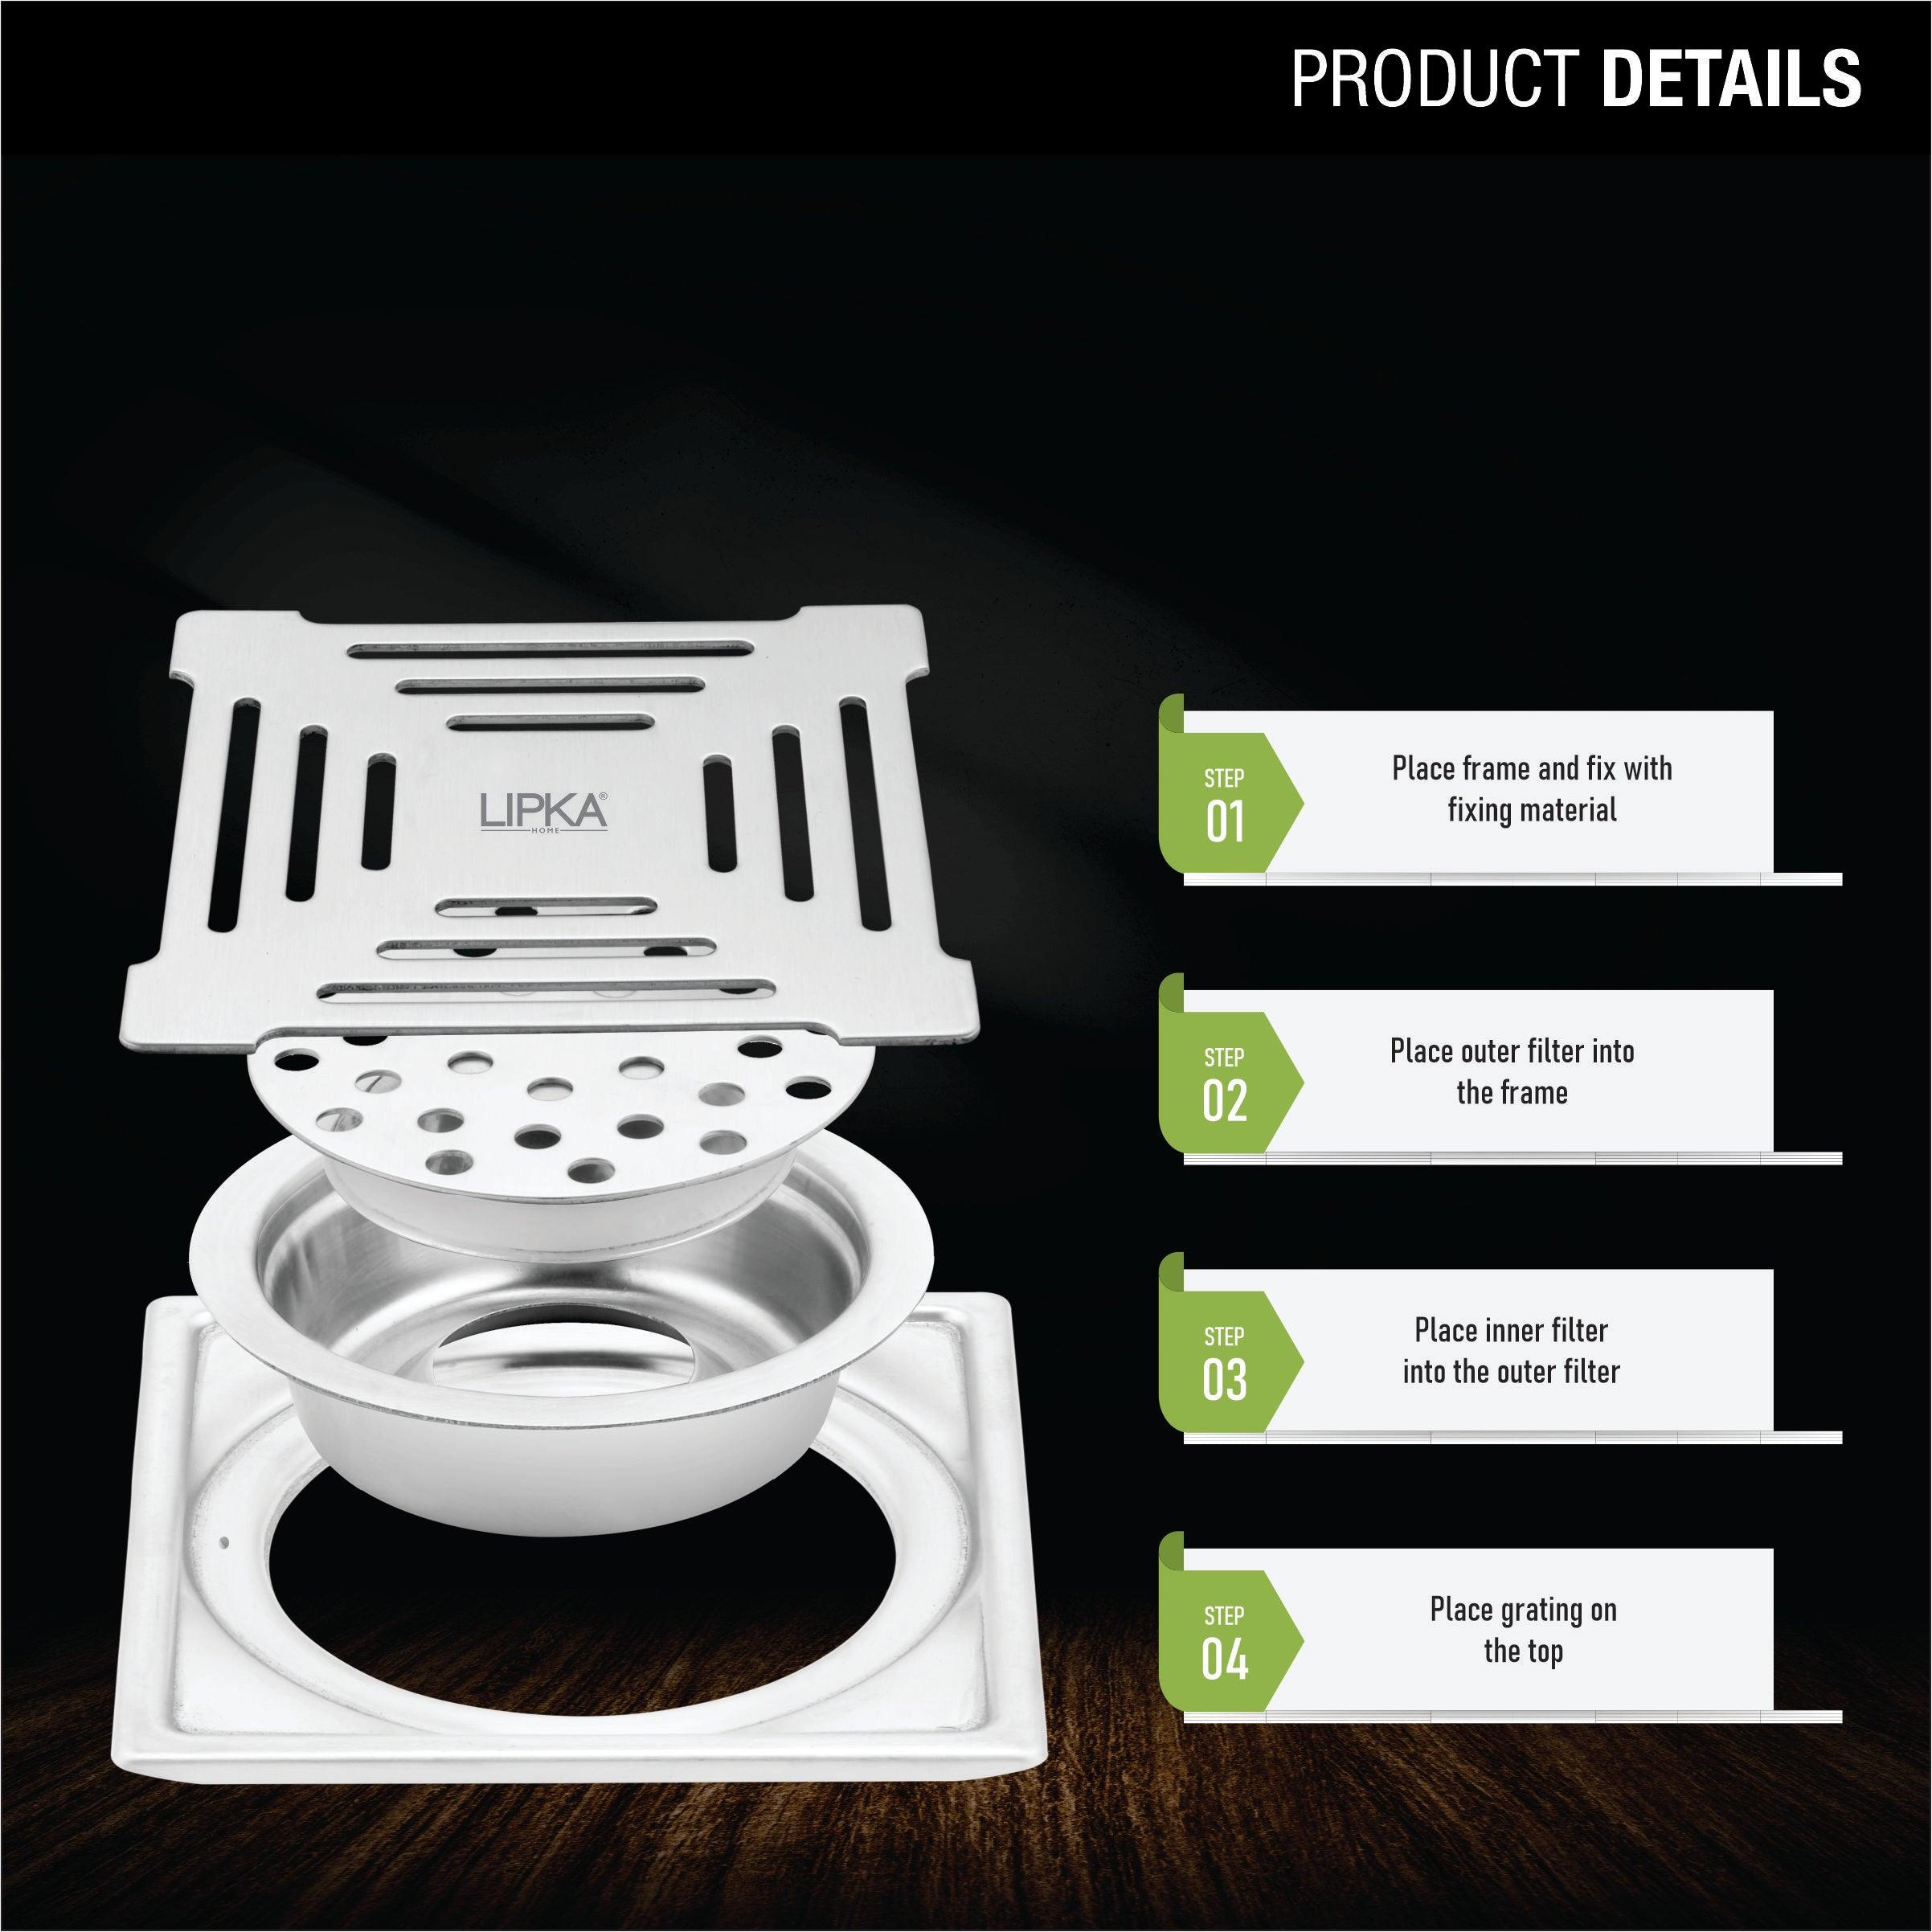 Green Exclusive Square Floor Drain (5 x 5 Inches) with Cockroach Trap product details